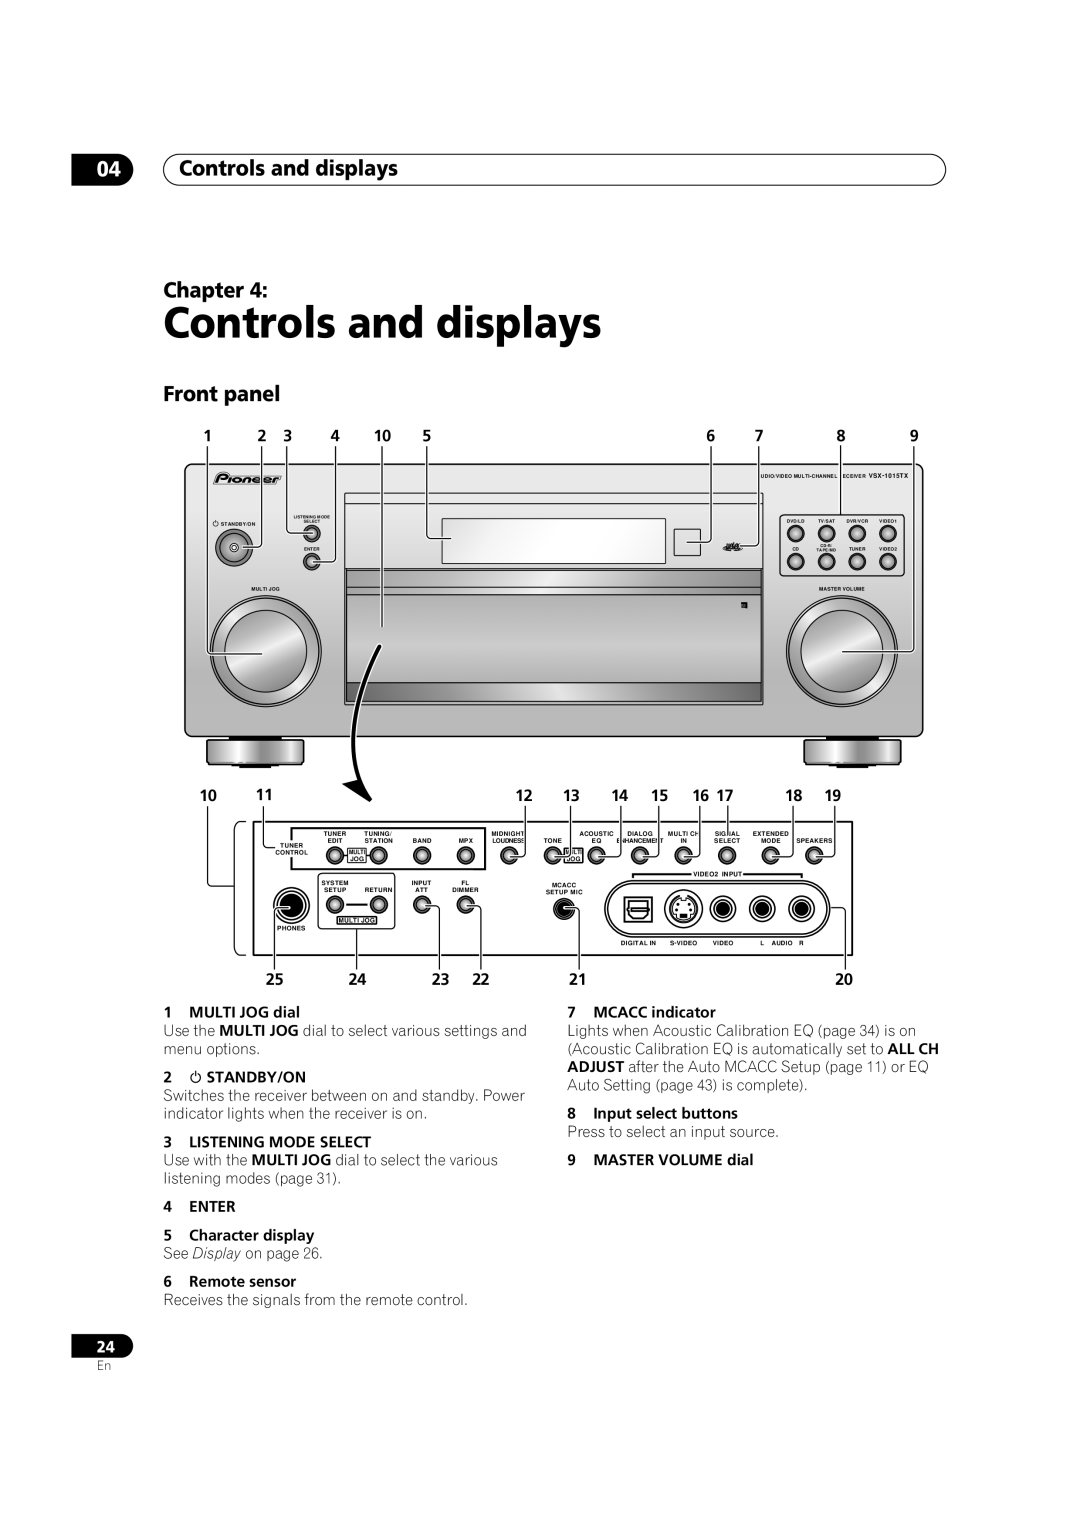 Pioneer VSX-1015TX operating instructions 04Controls and displays Chapter, Front panel 